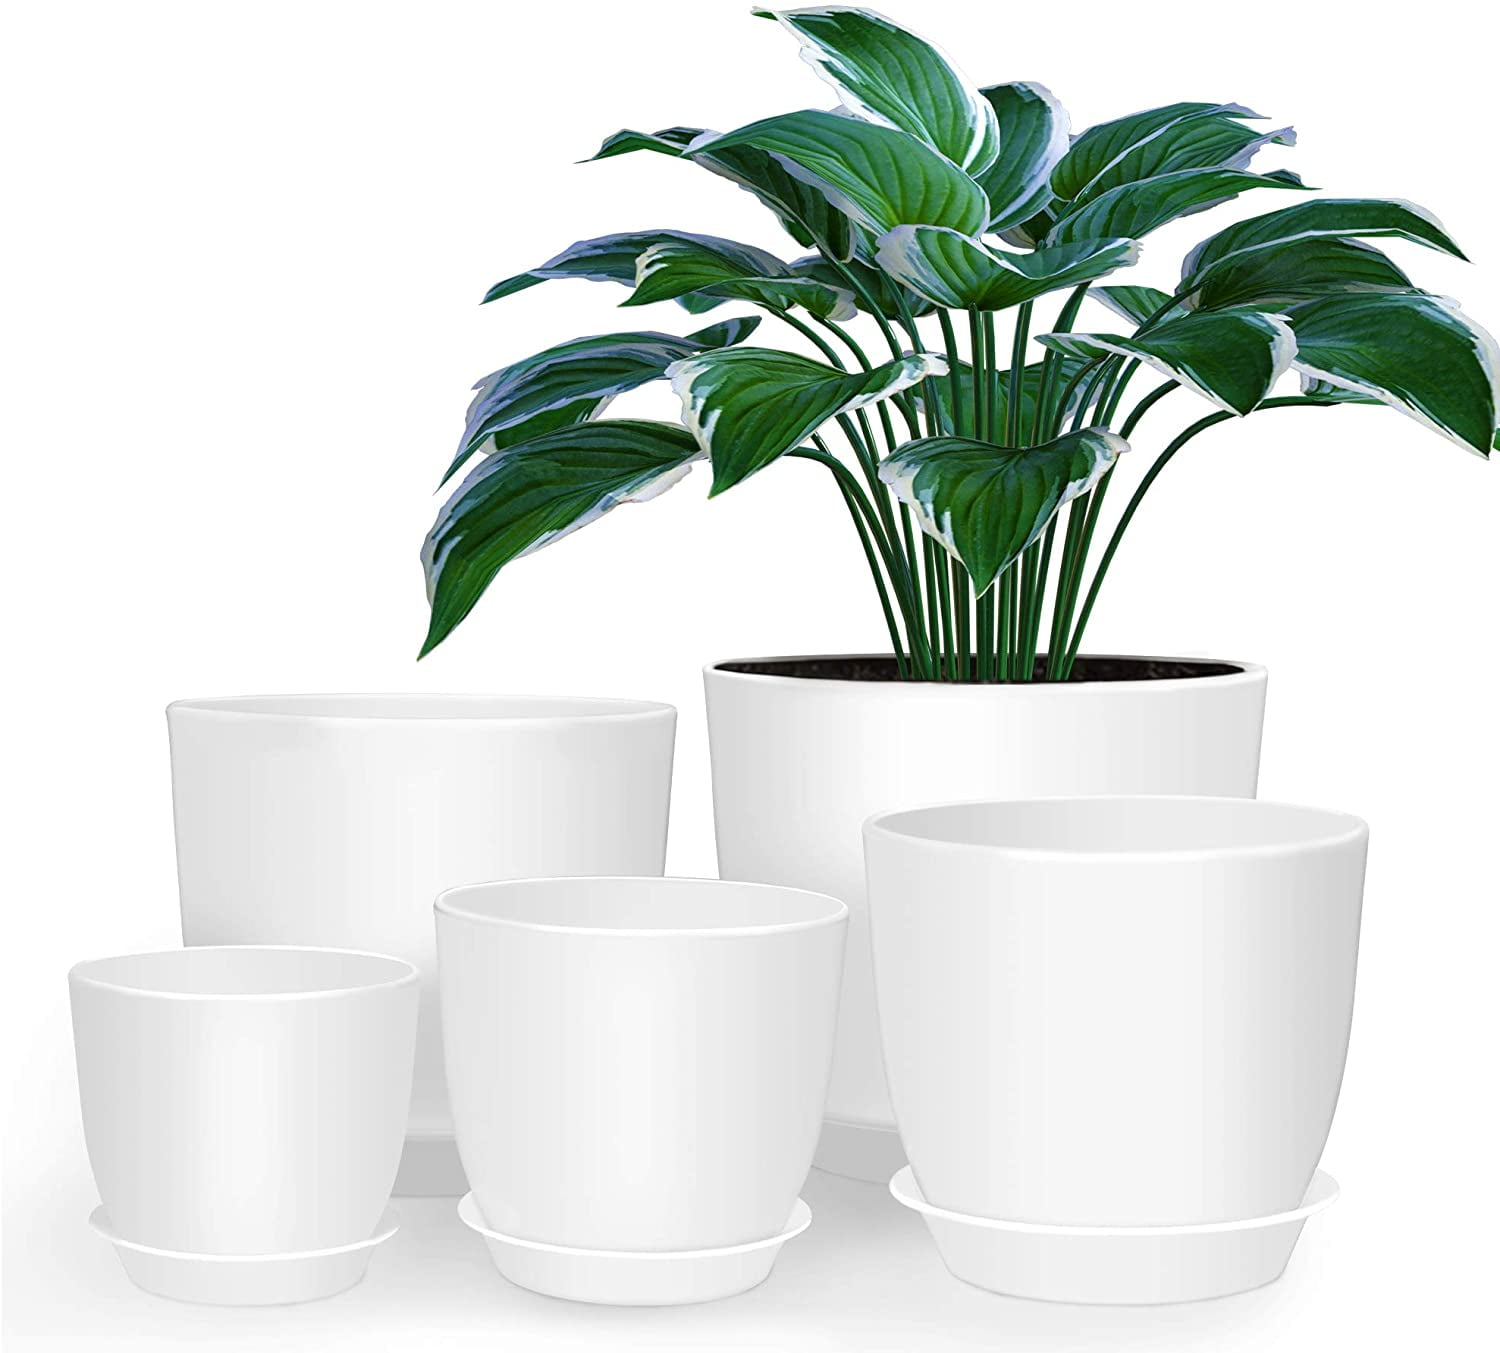 Self Watering Planter for Indoor Outdoor House Plants Modern Decorative Plastic Flower Pot Container with Drainage Hole and Saucer 6.5 Inch Plant Pot 6 Pack, Dark Gray 